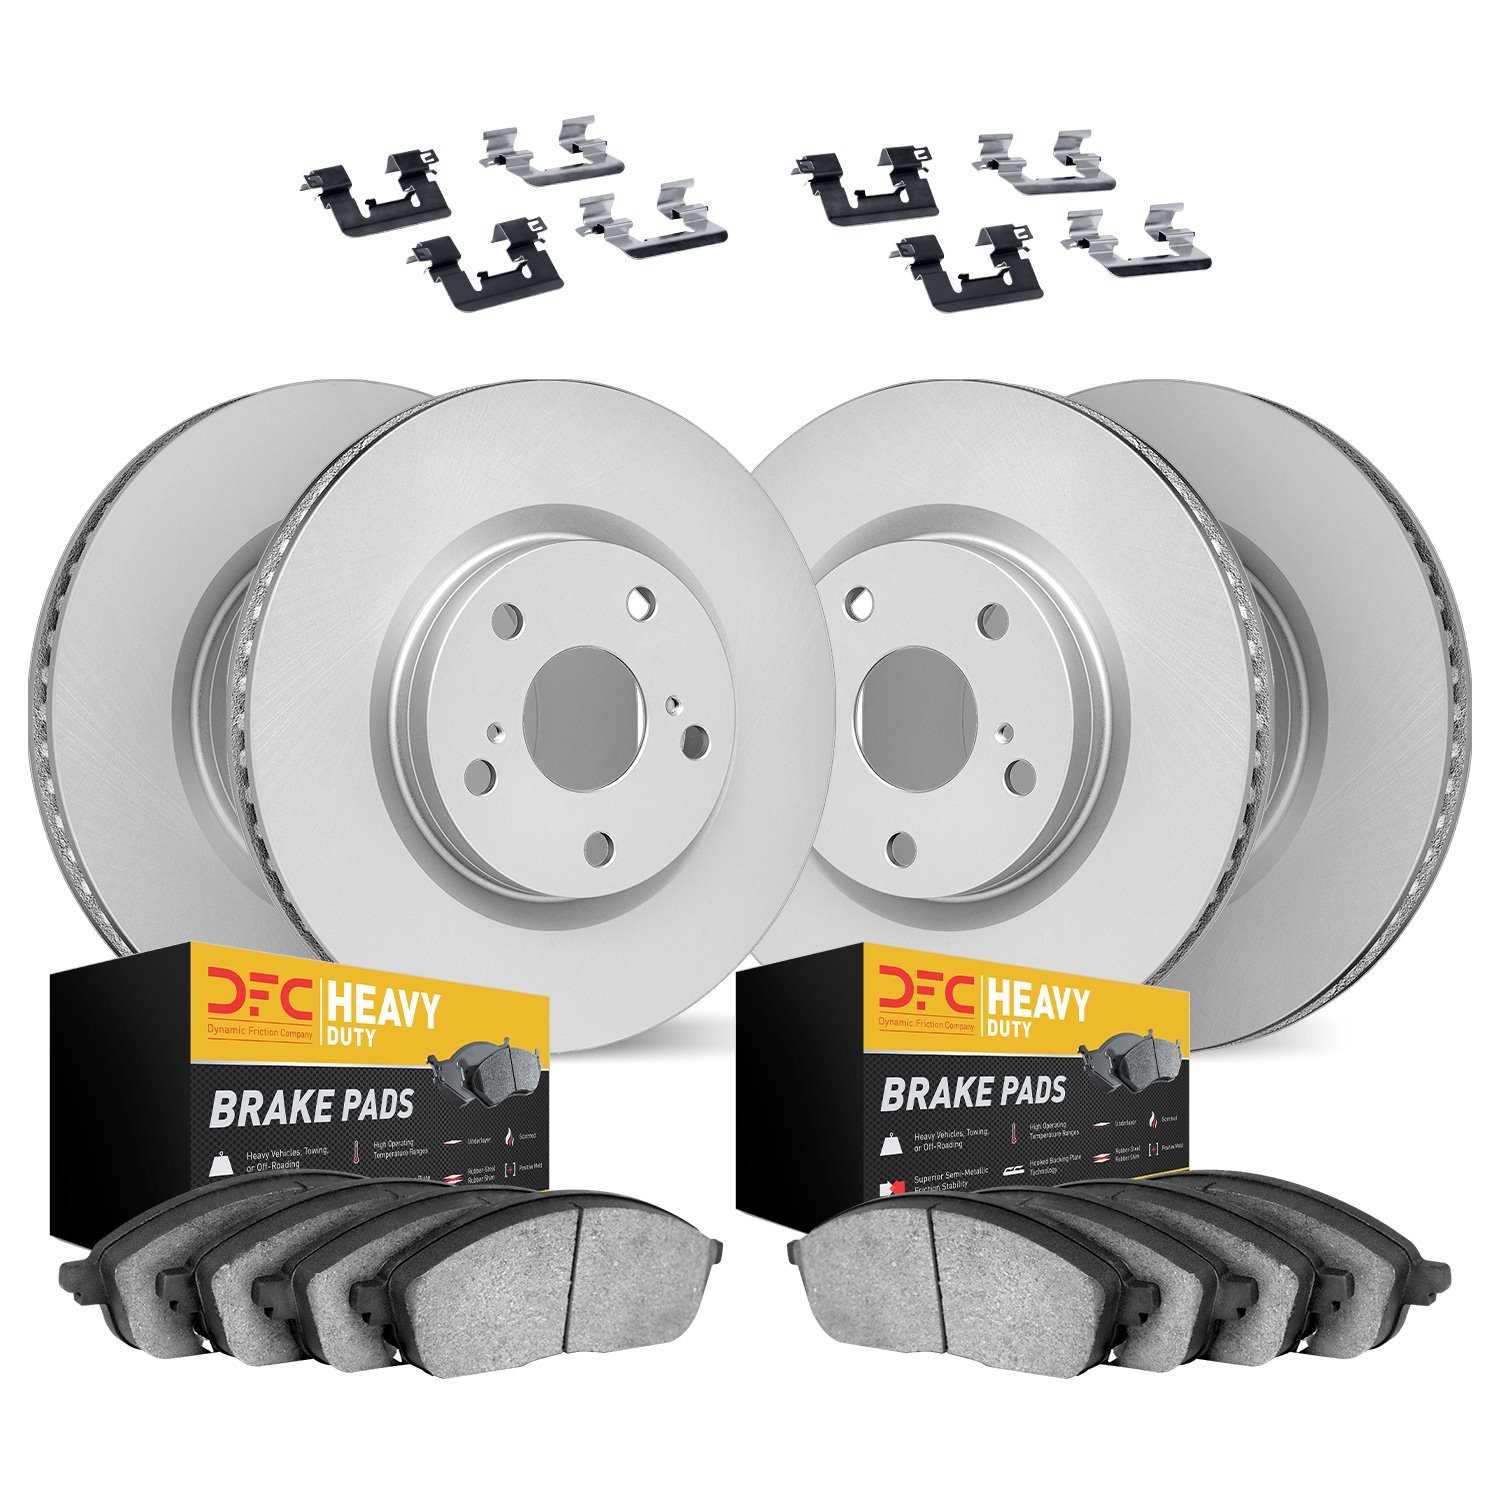 4214-56014 Geospec Brake Rotors w/Heavy-Duty Brake Pads & Hardware, 2003-2011 Ford/Lincoln/Mercury/Mazda, Position: Front and Re